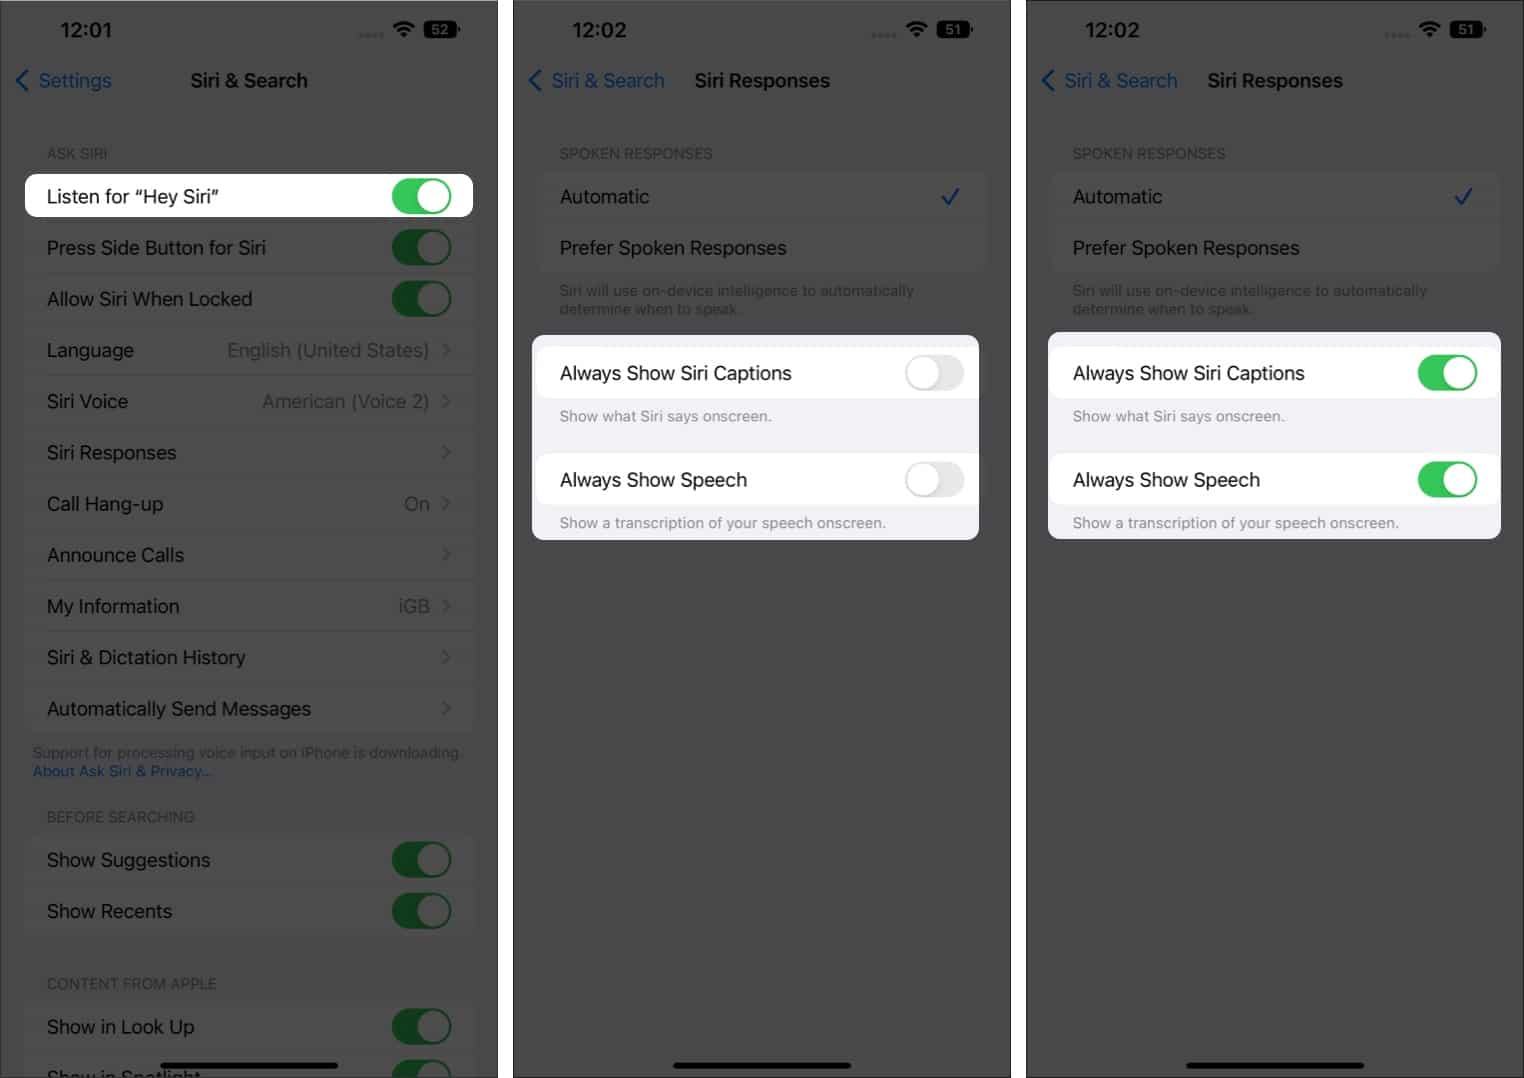 Steps to enable offline Siri on iPhone